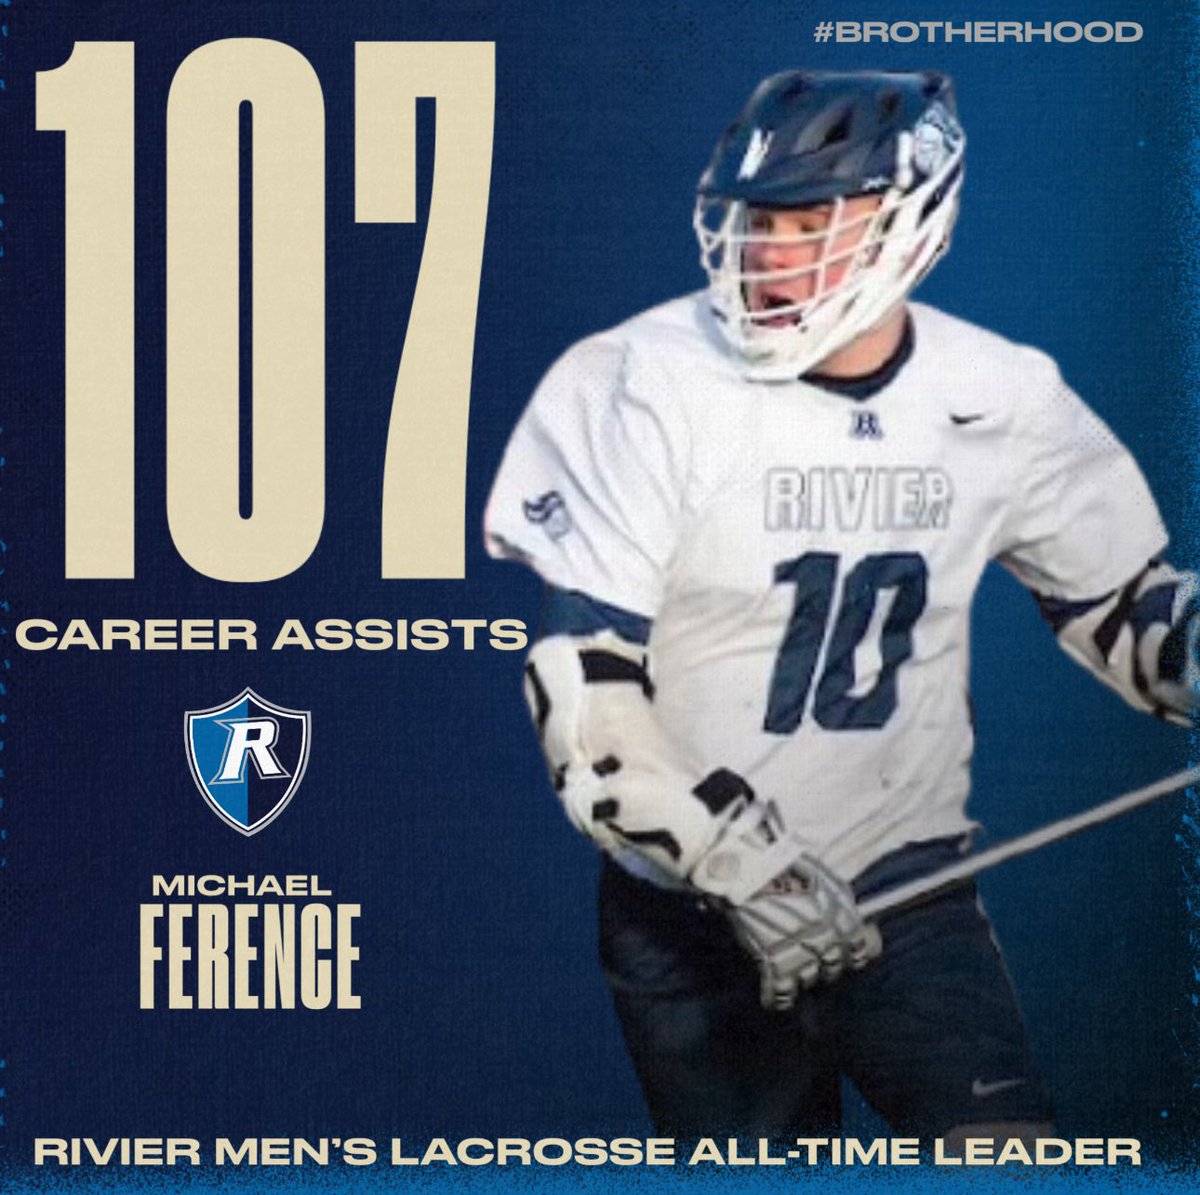 Michael Ference takes over the top spot in career assists previously set by Kyle Graham in the spring of 2016.
#WantMoreWorkMoreEarnMore #BROTHERHOOD @rivraiders @rivieruniversity @michaelf_10 @totallykyle20